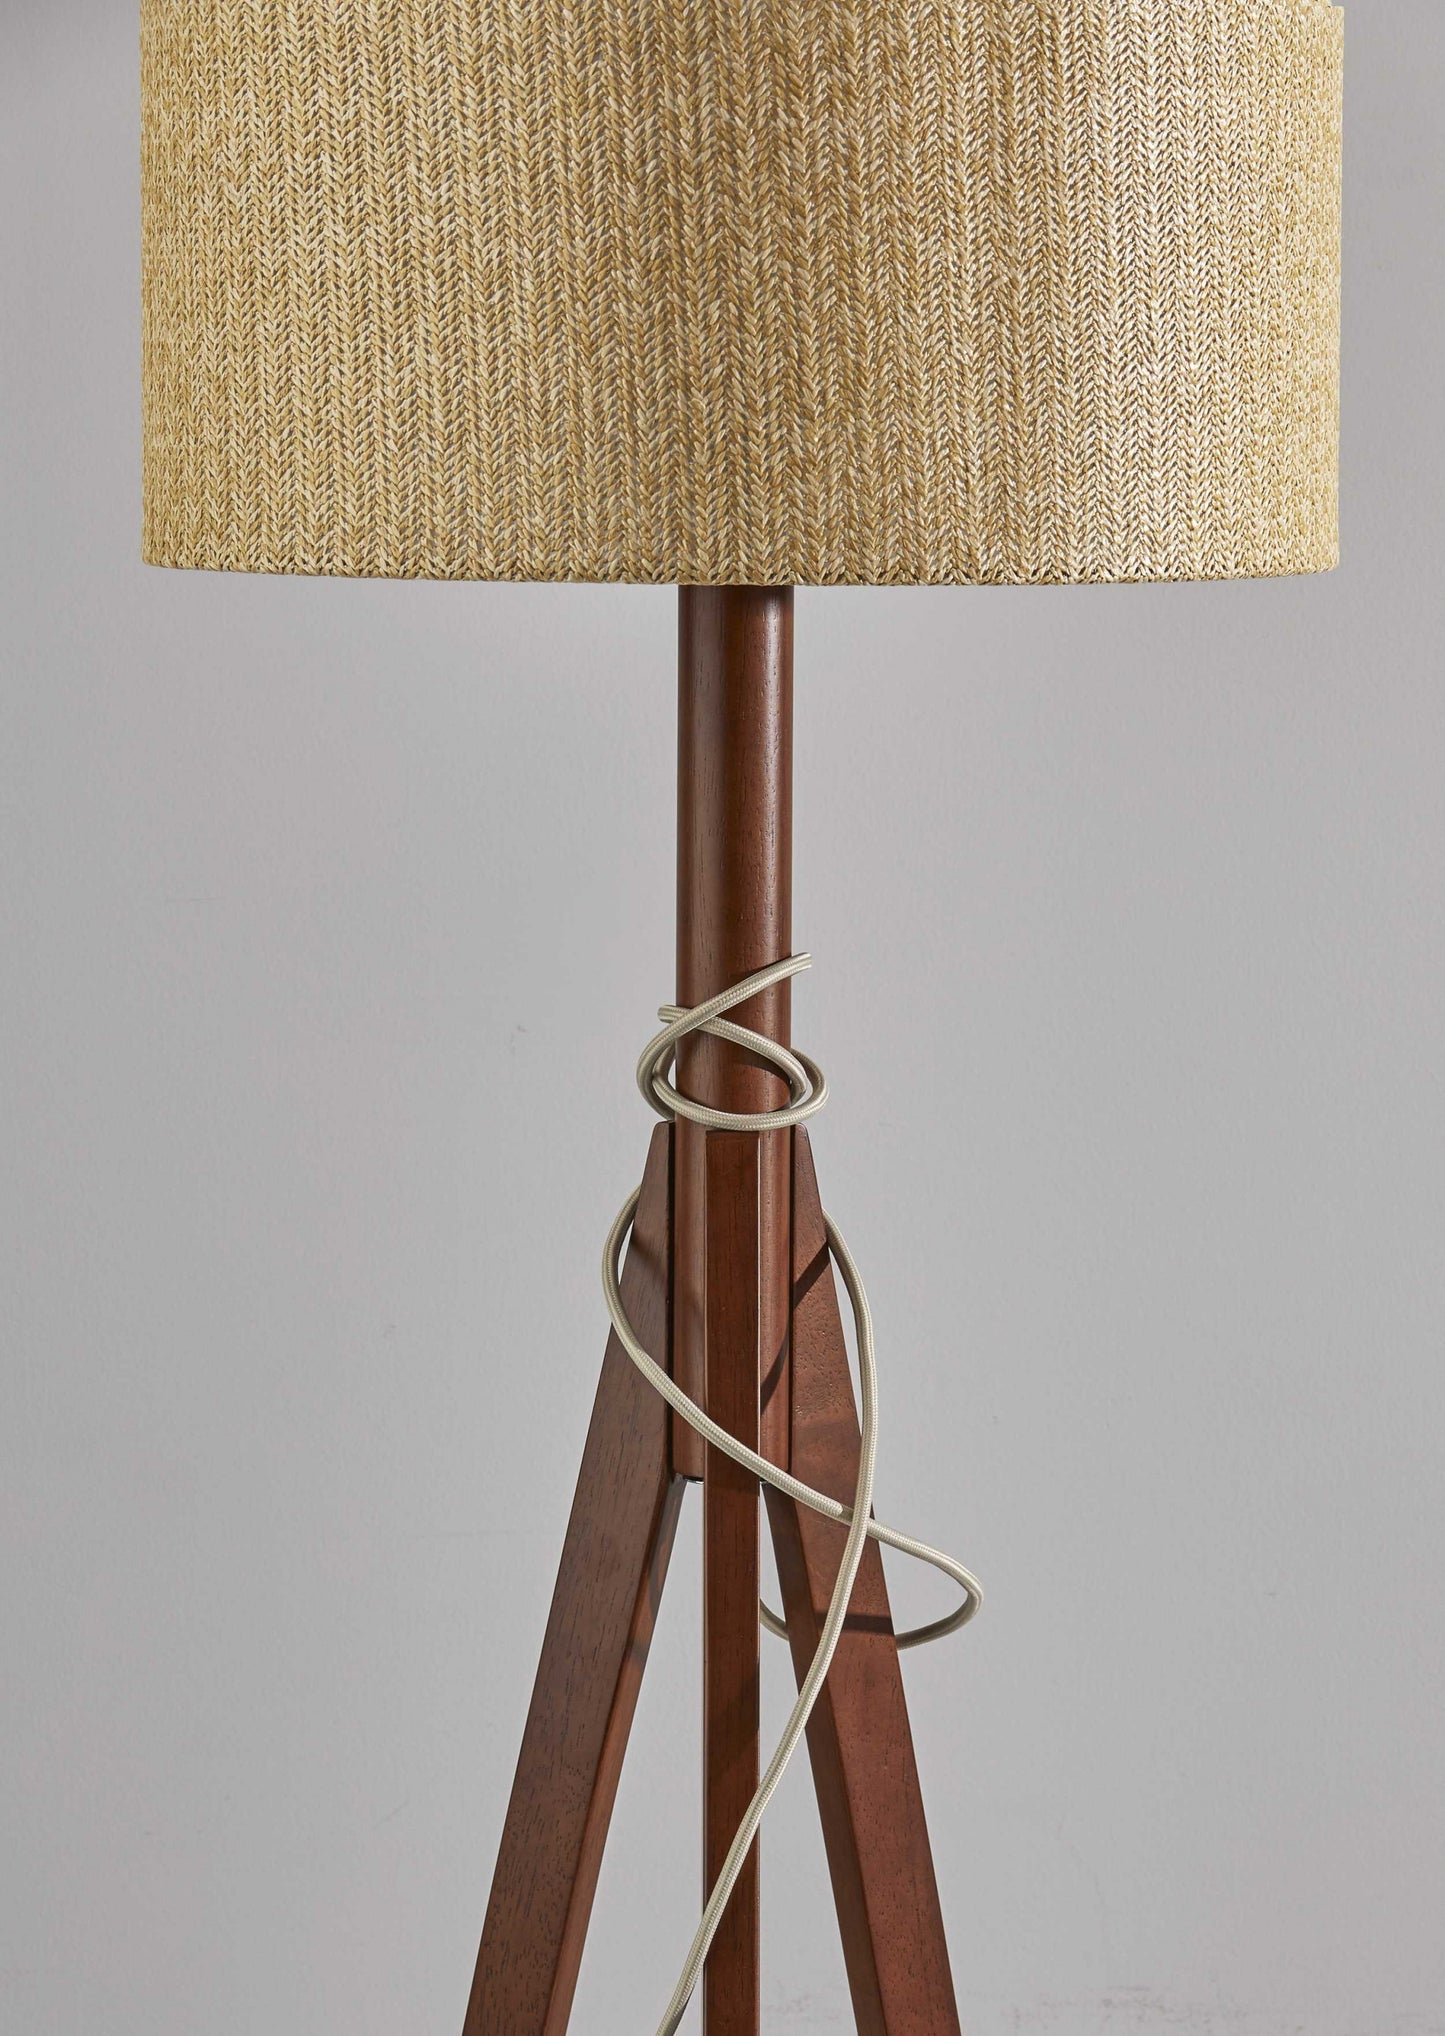 59" Tripod Floor Lamp With Brown Drum Shade